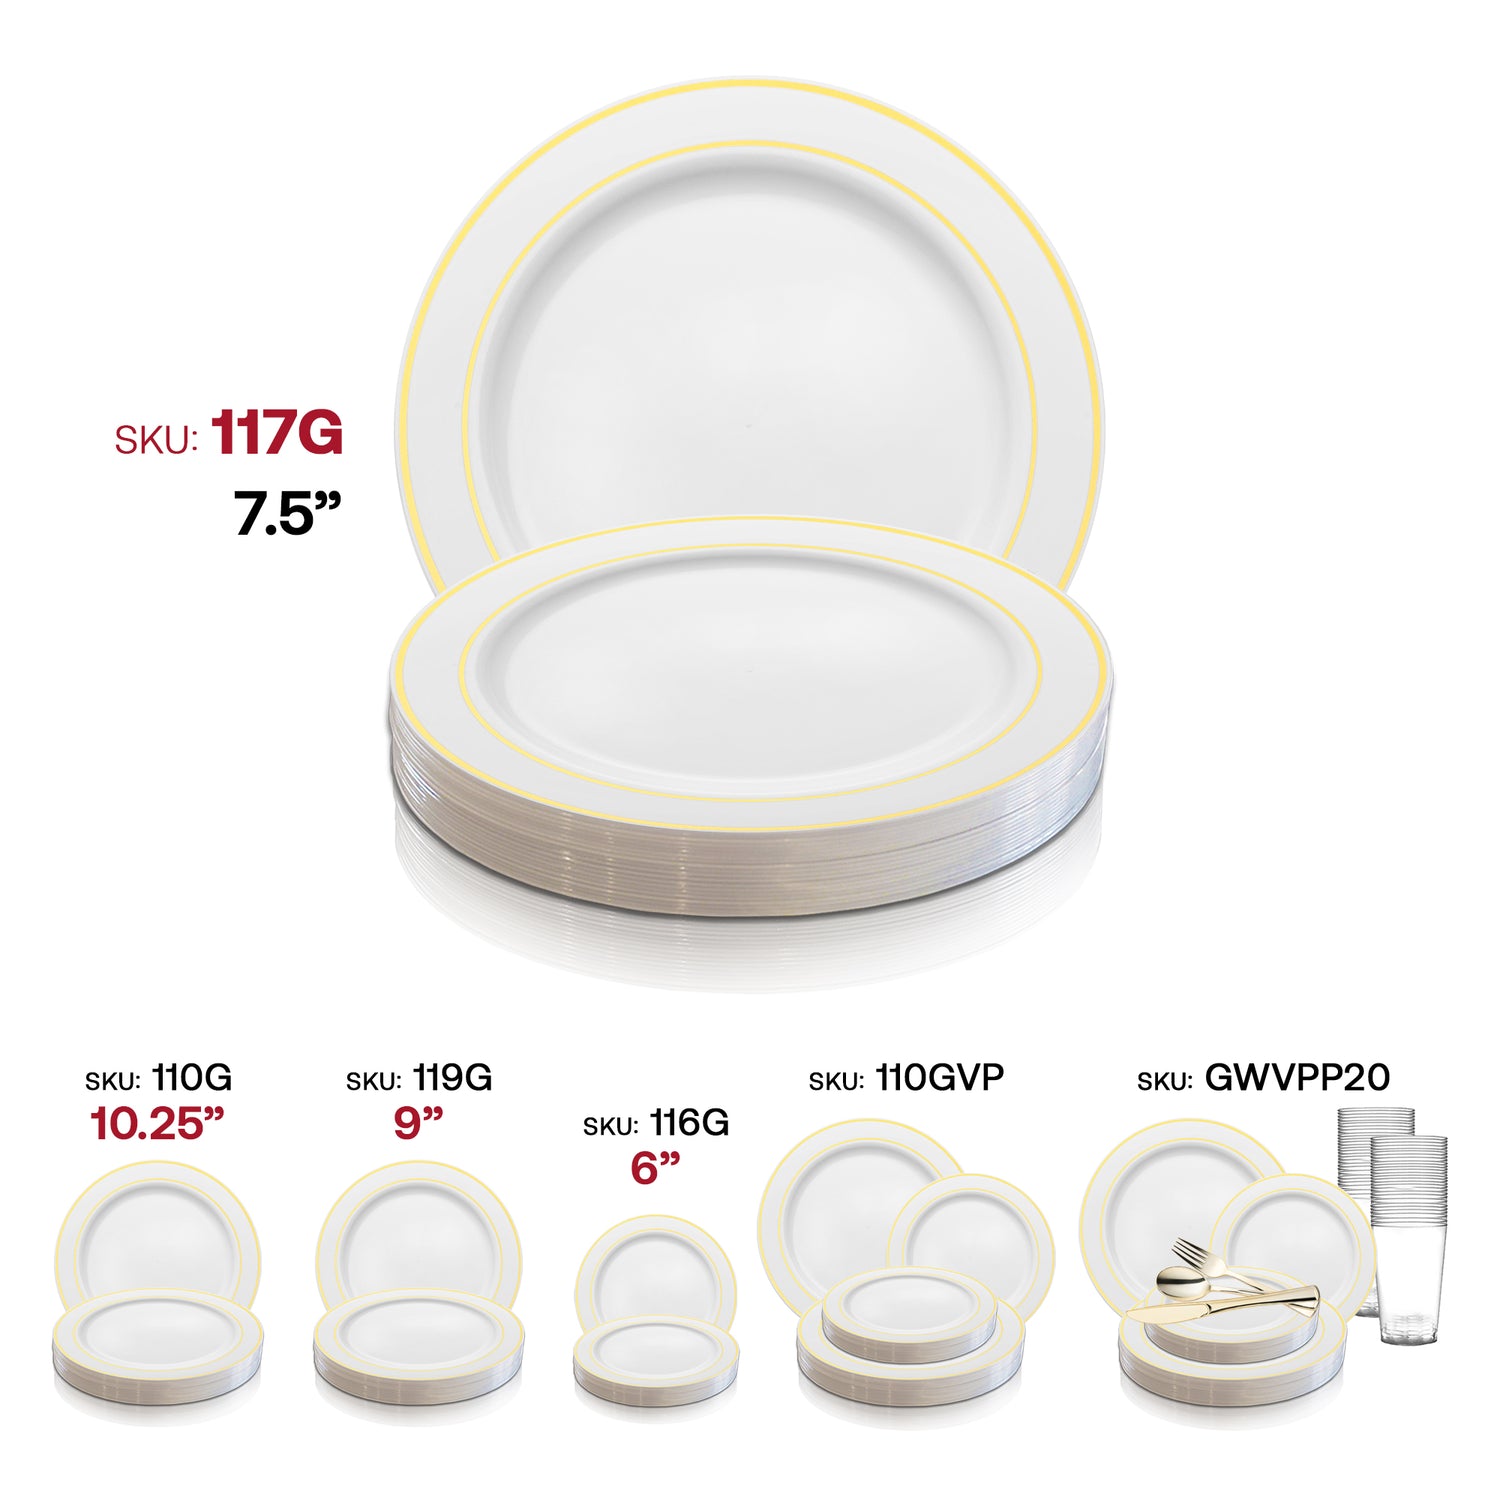 White with Gold Edge Rim Plastic Appetizer/Salad Plates (7.5") SKU | The Kaya Collection